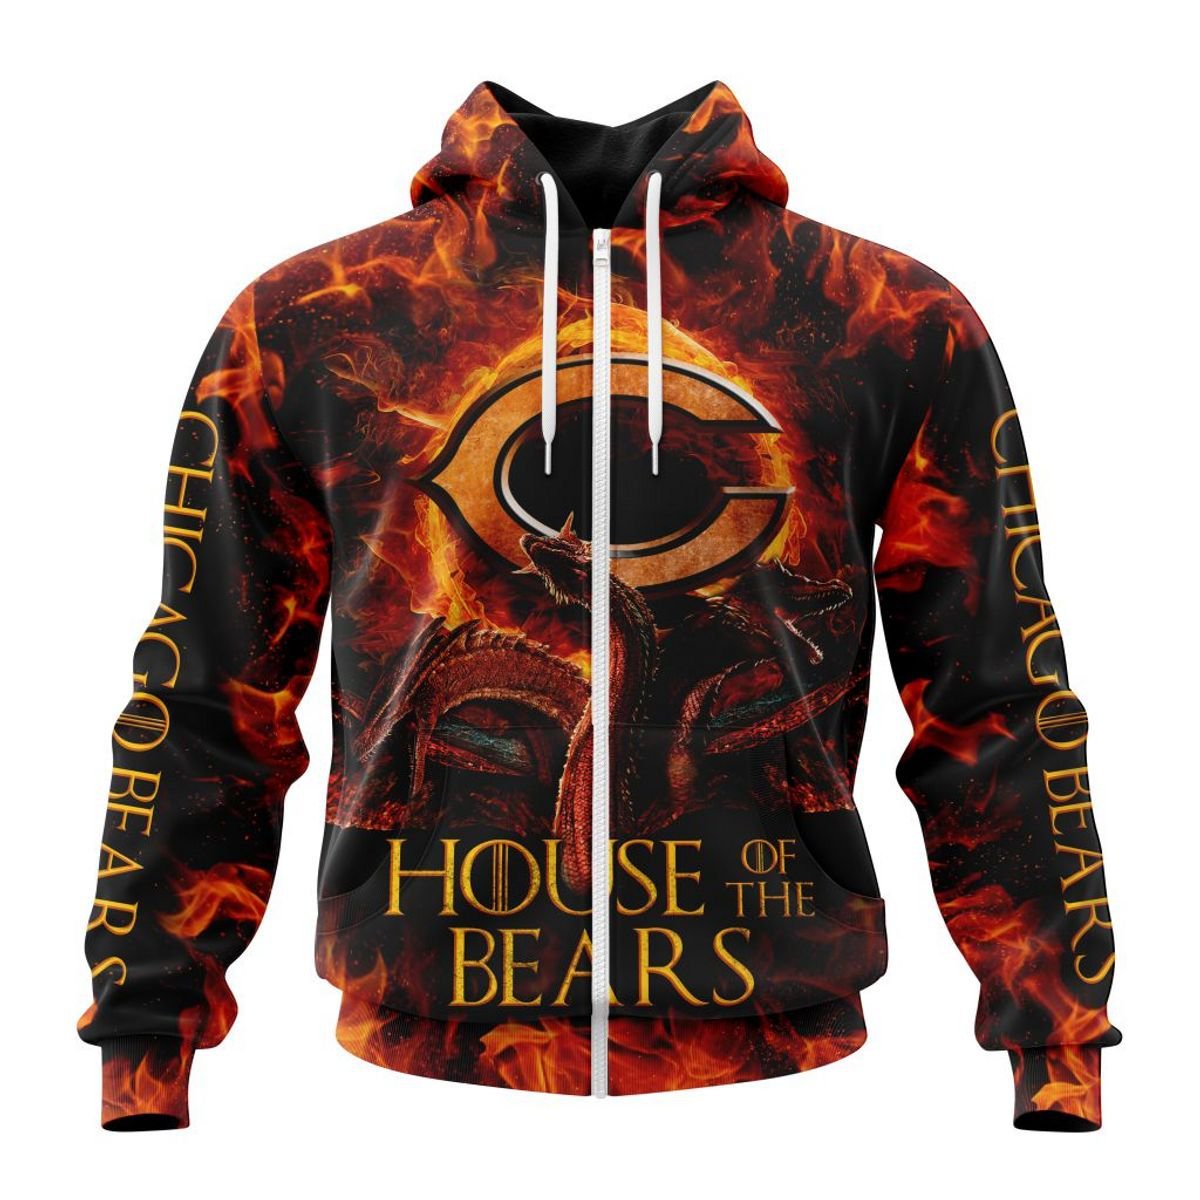 CHICAGO BEARS GAME OF THRONES – HOUSE OF THE BEARS 3D HOODIE